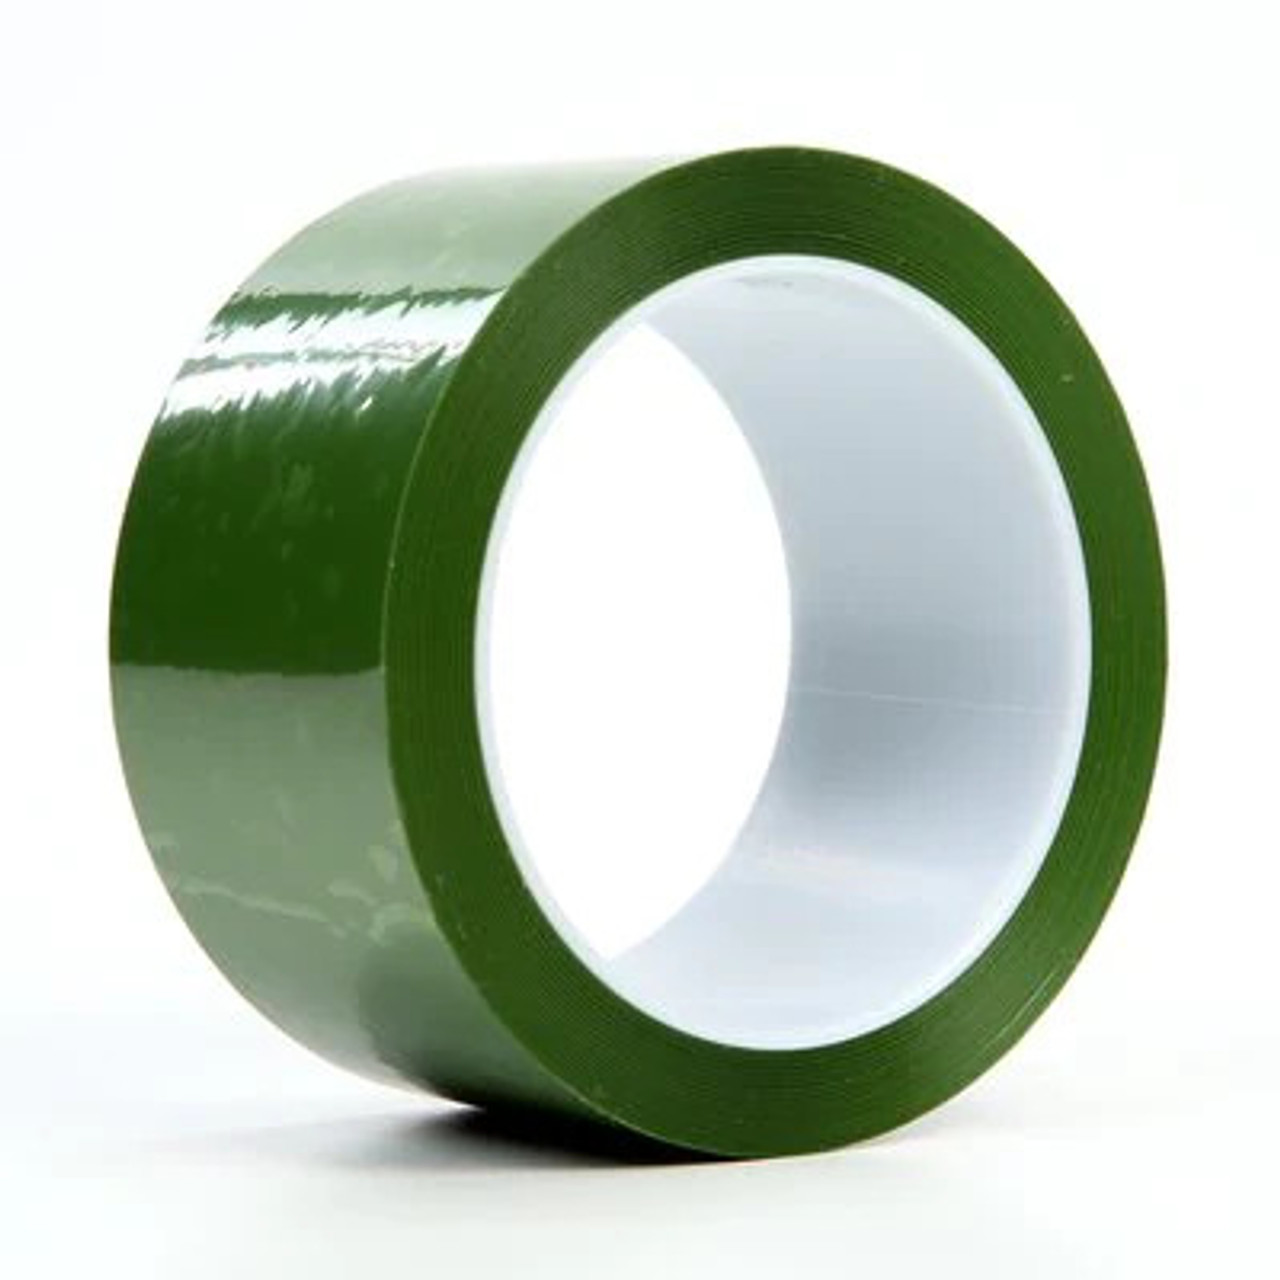 3M™ Polyester Tape 8402, Green, 1.9 mil, 1 in x 72 yd